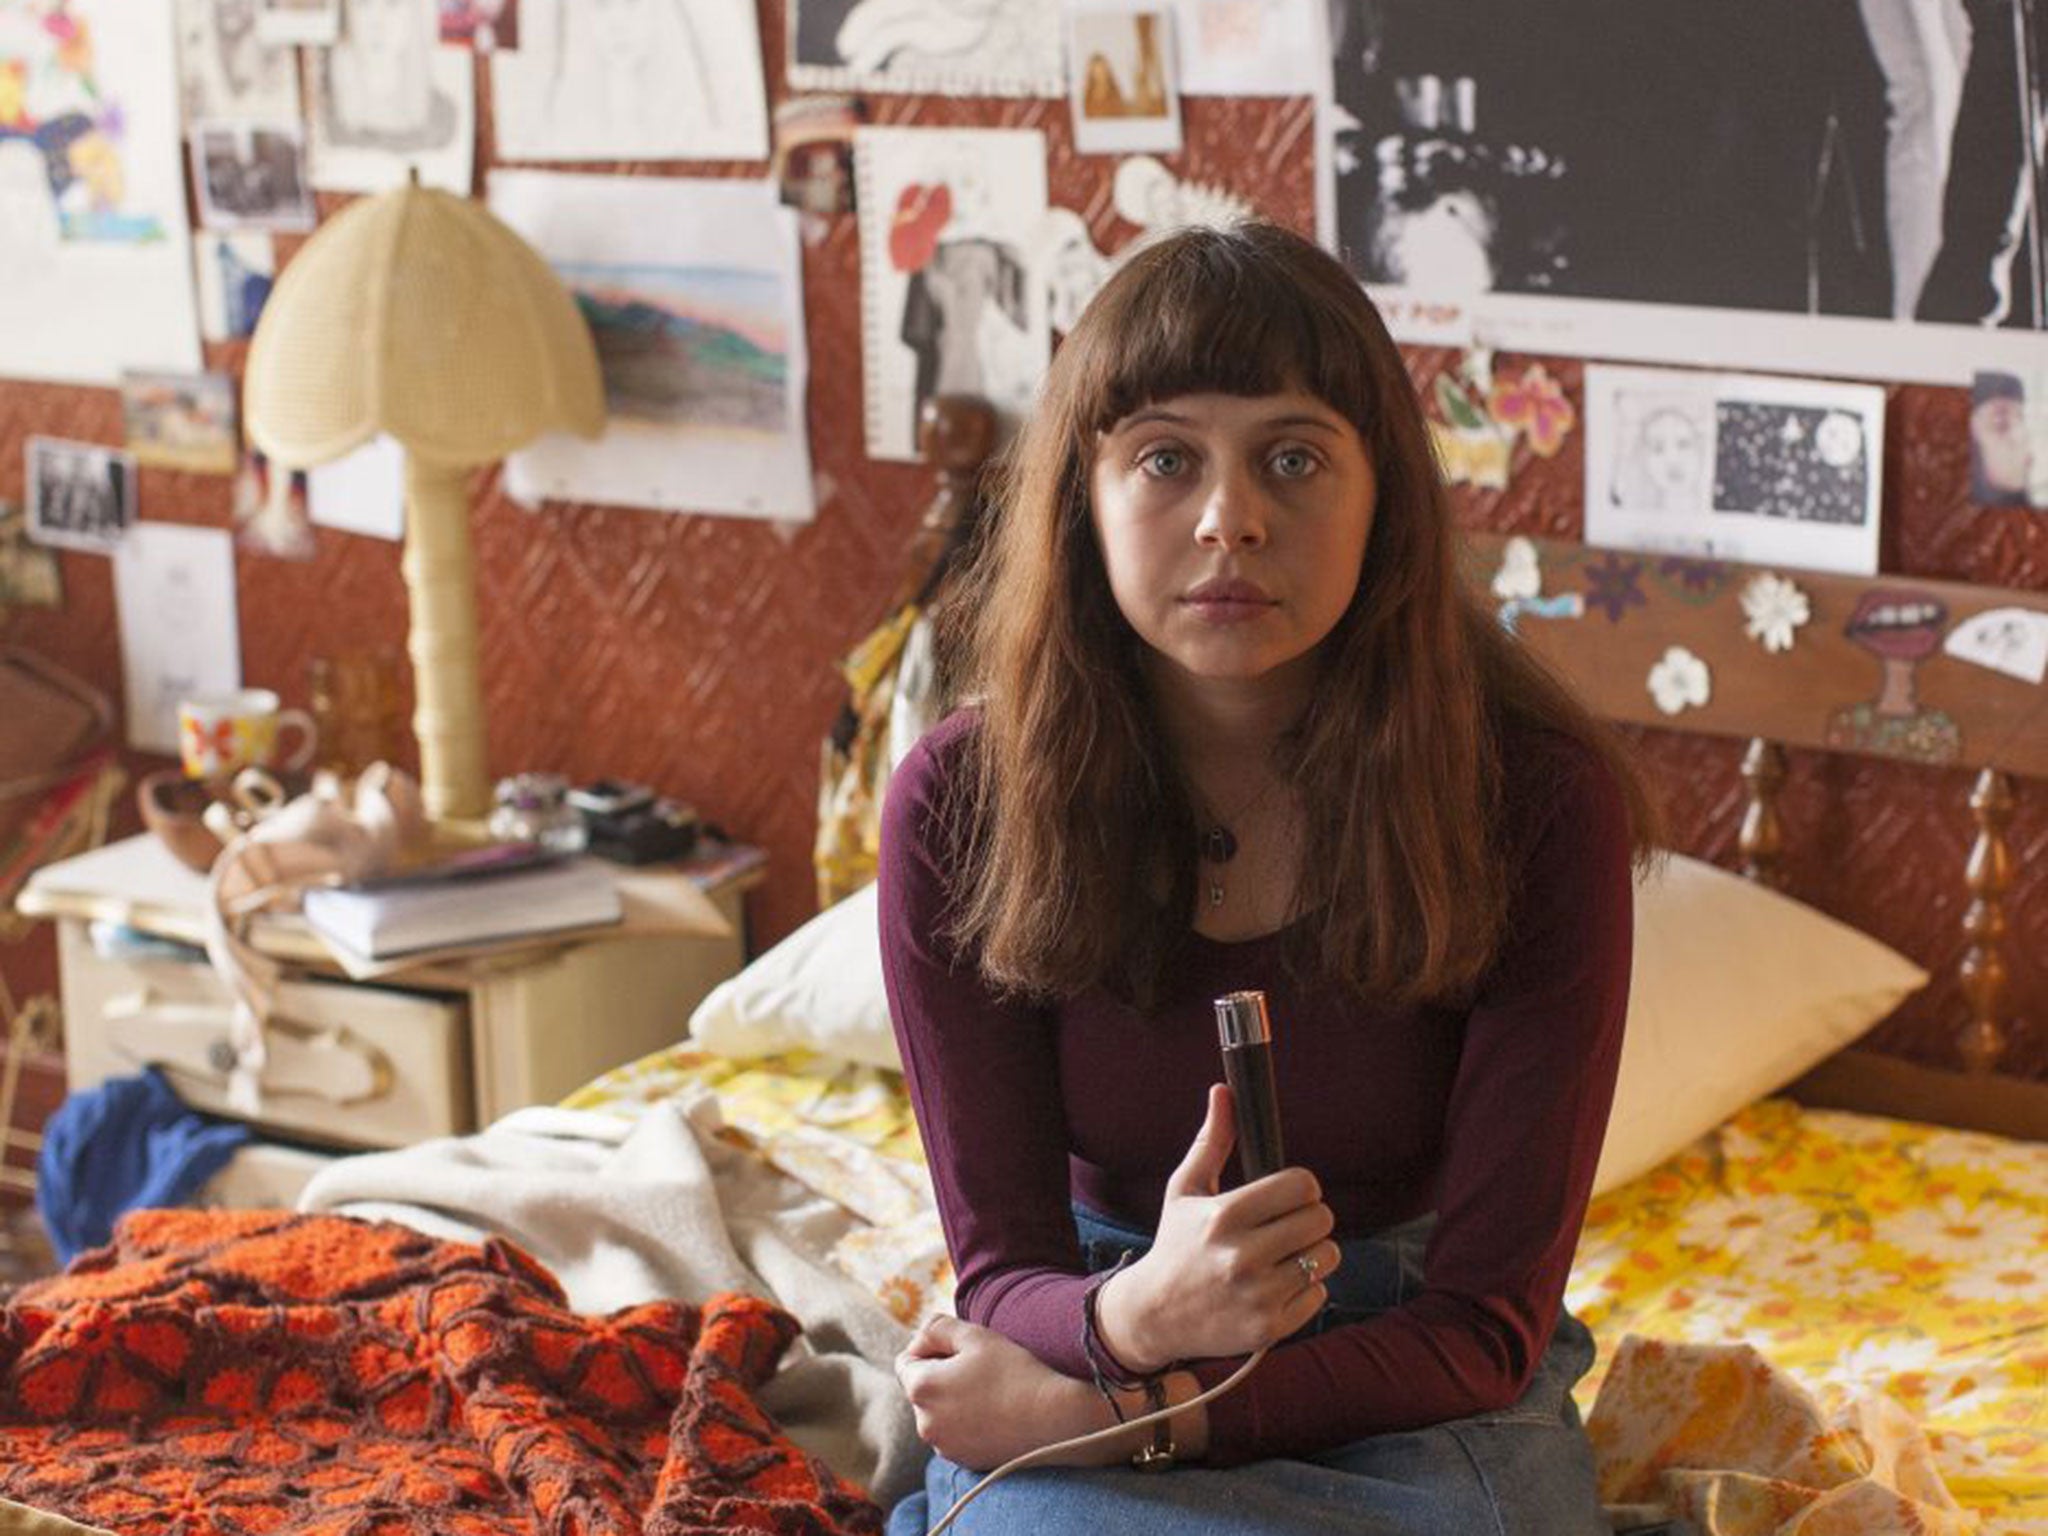 The Diary Of A Teenage Girl, film review Like a distaff US version of Adrian Mole with more sex The Independent The Independent